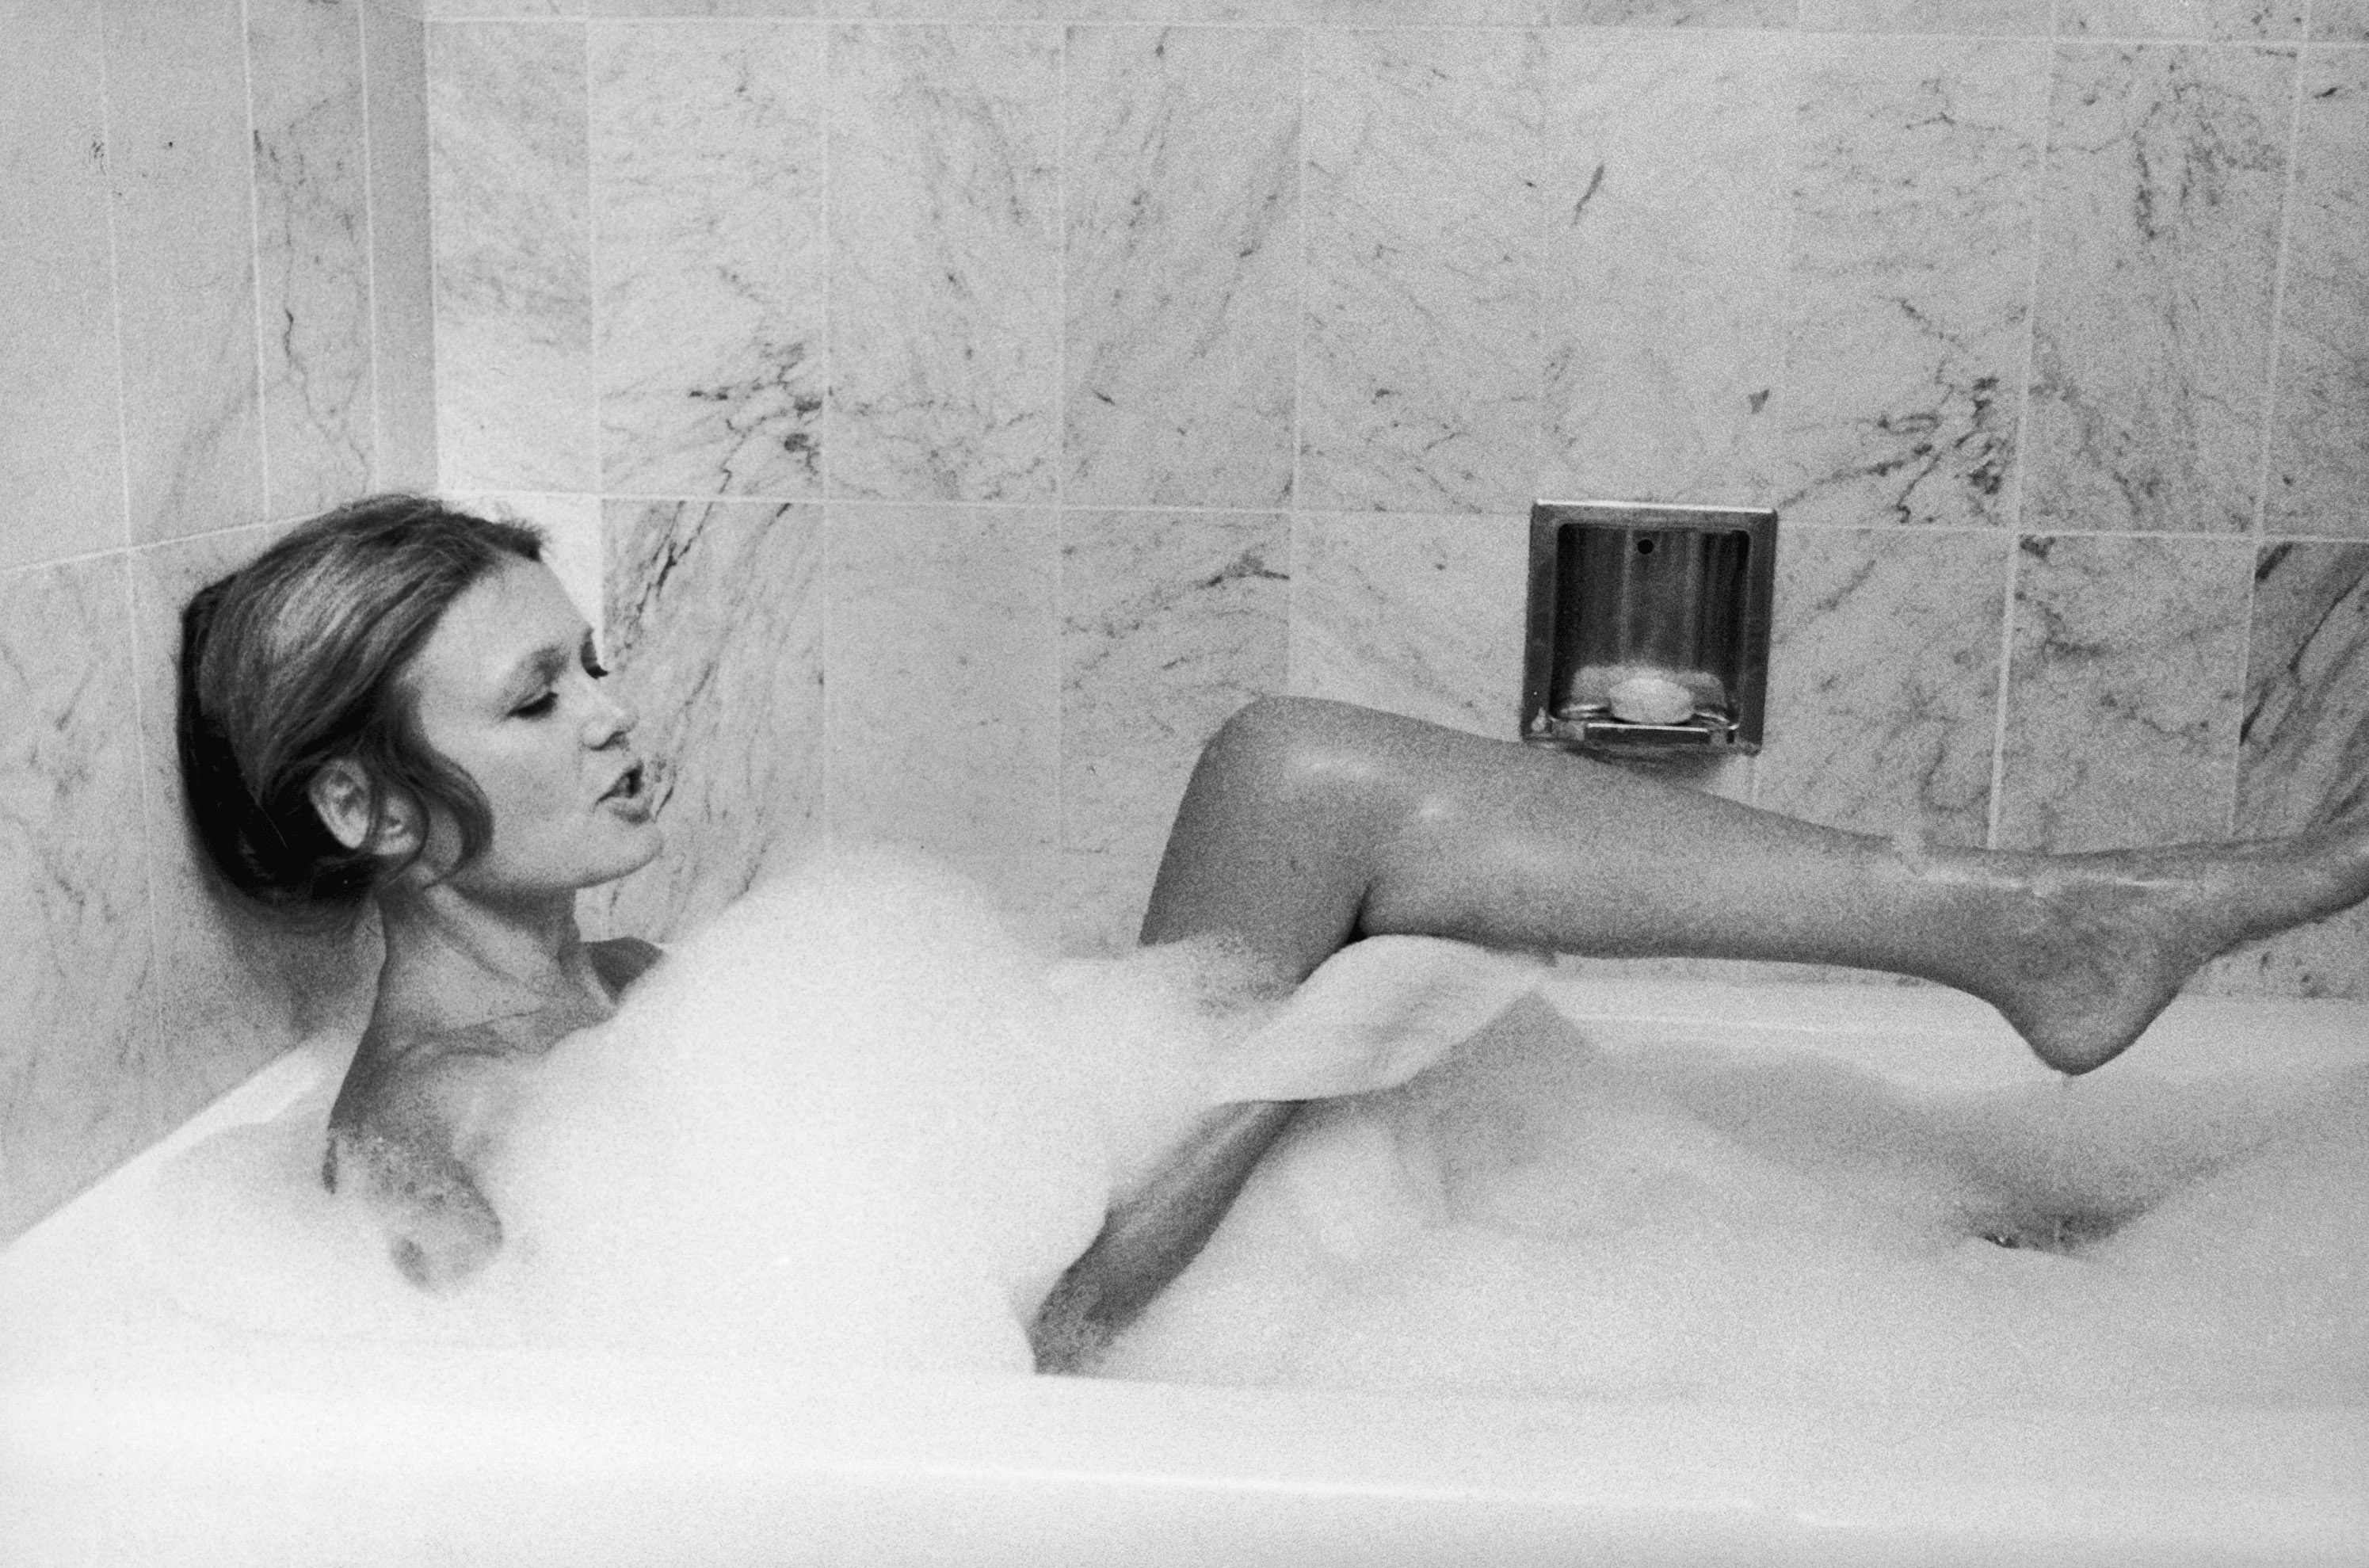 Feminist journalist and author Gloria Steinem baring one leg as she relaxes in a luxurious bubble bath at home. (Marianne Barcellona—Time &amp; Life Pictures/Getty Image)